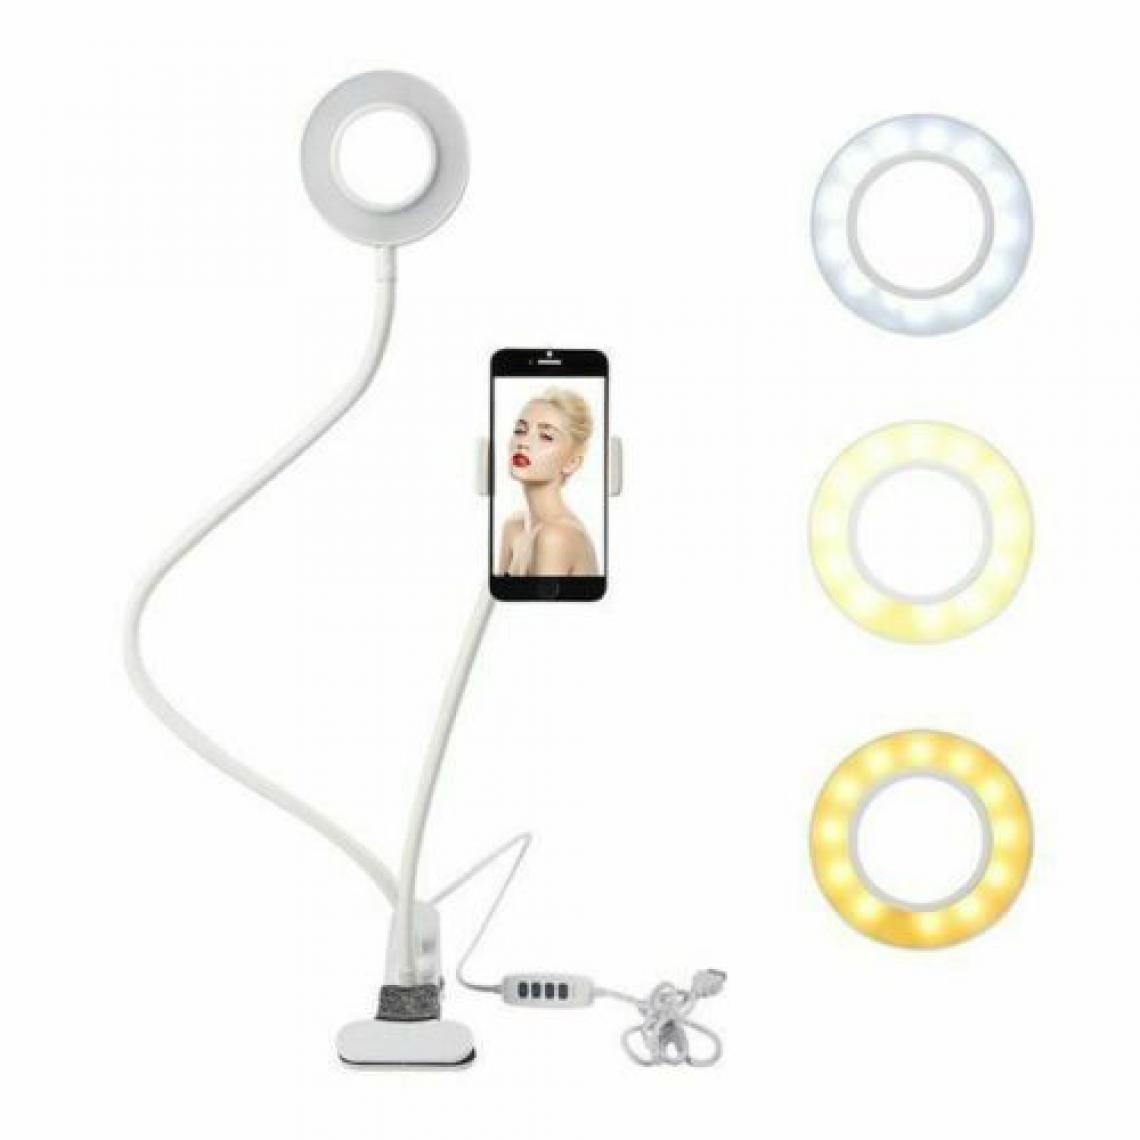 Ozzzo - Stand support bureau selfie led ozzzo blanc pour SONY Xperia XZ2 Compact - Station d'accueil smartphone